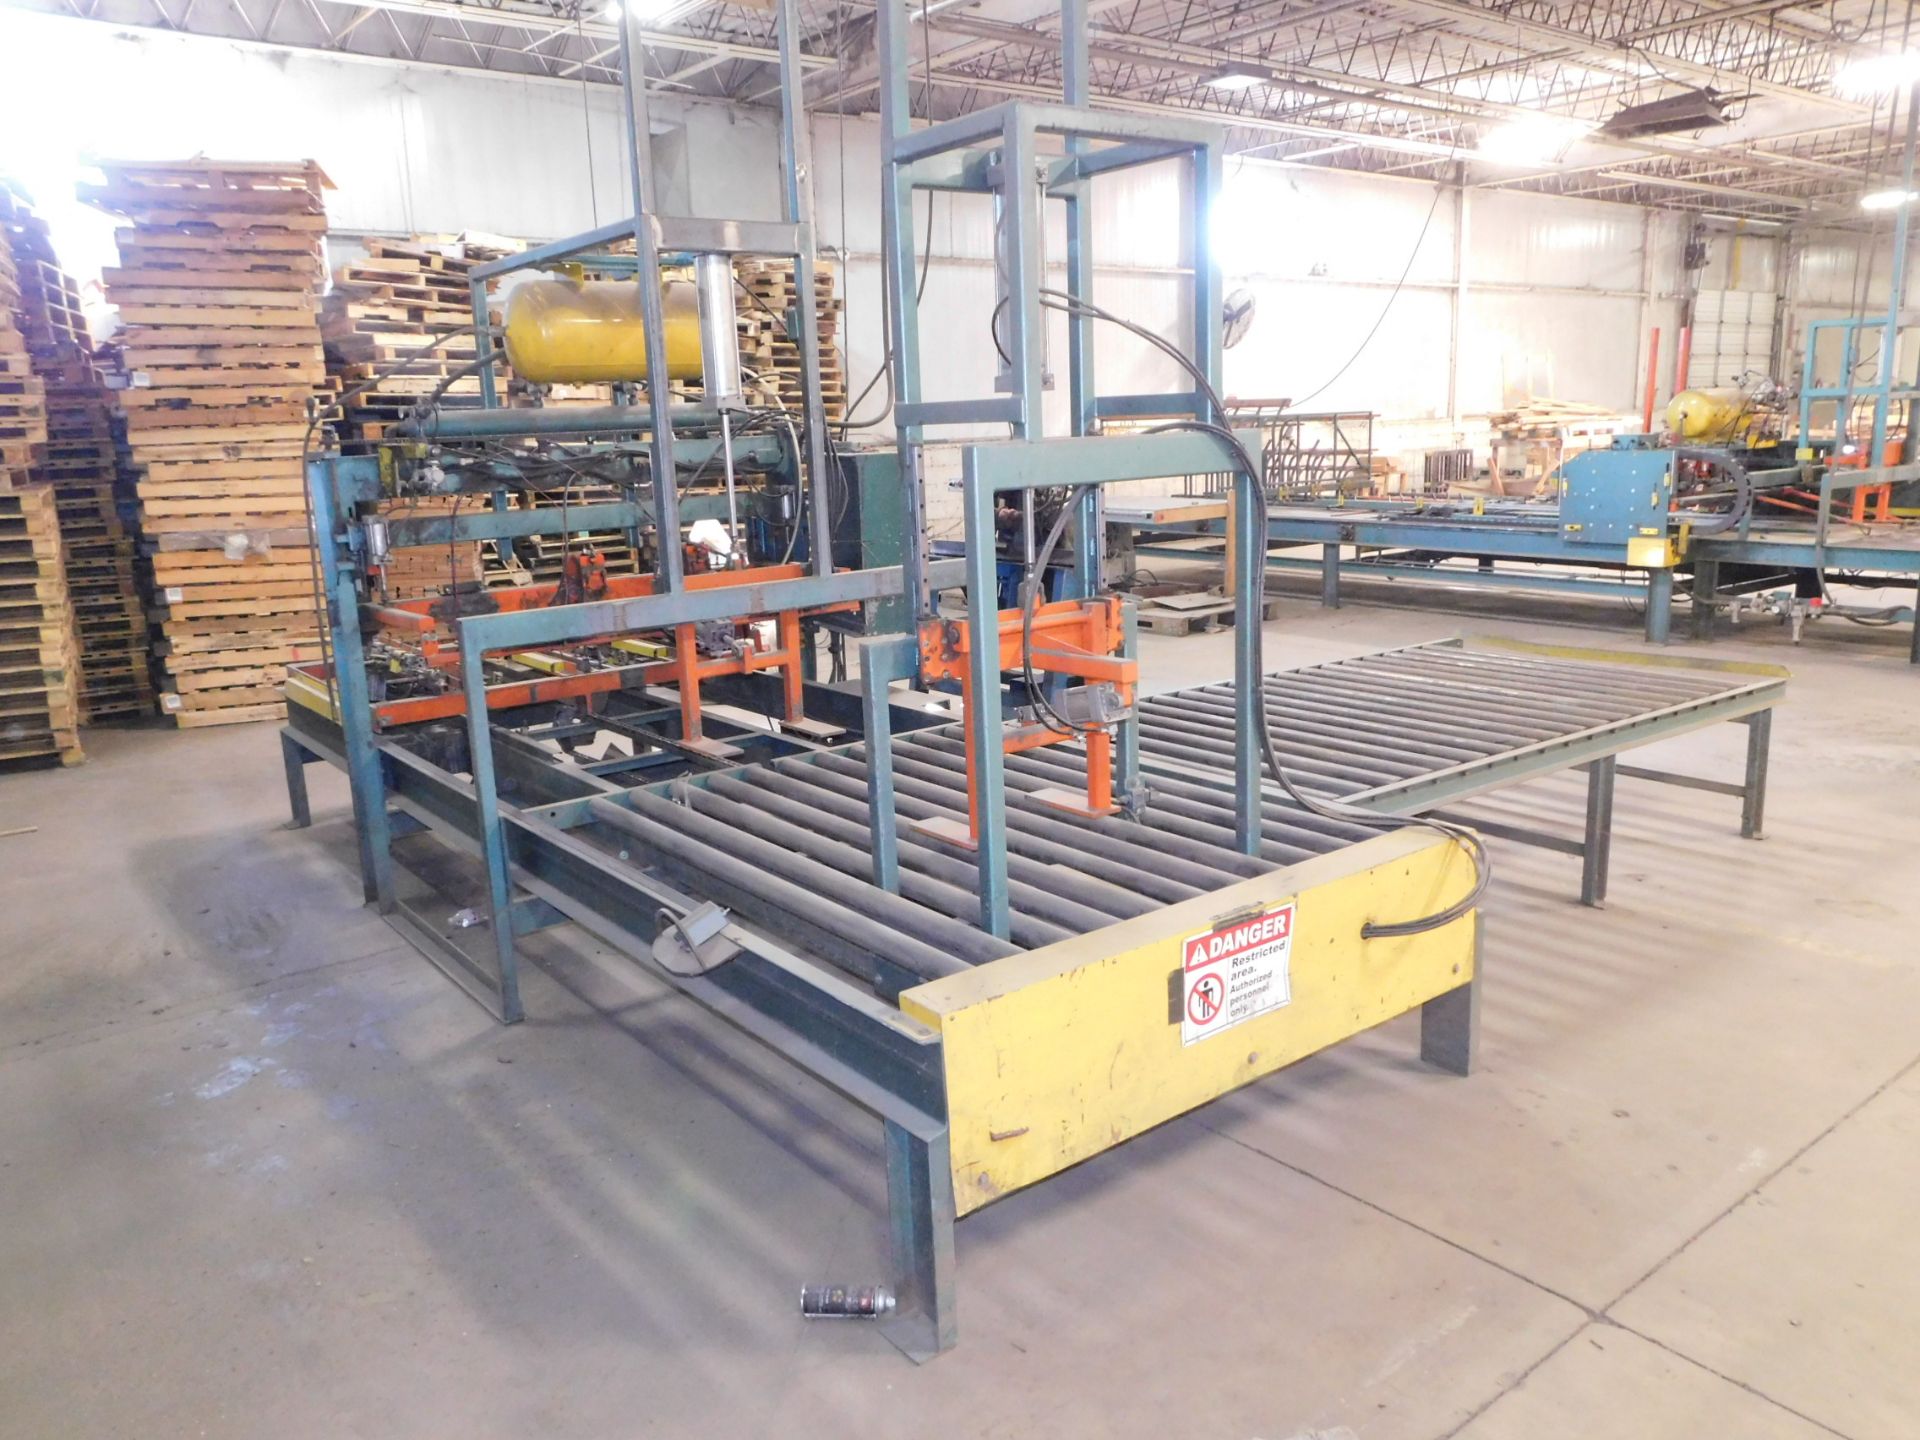 Rayco Edge Automatic Pallet Nailer, 64" x 10' Infeed Roller Conveyor, 6' x7' Stacking Area, Auto